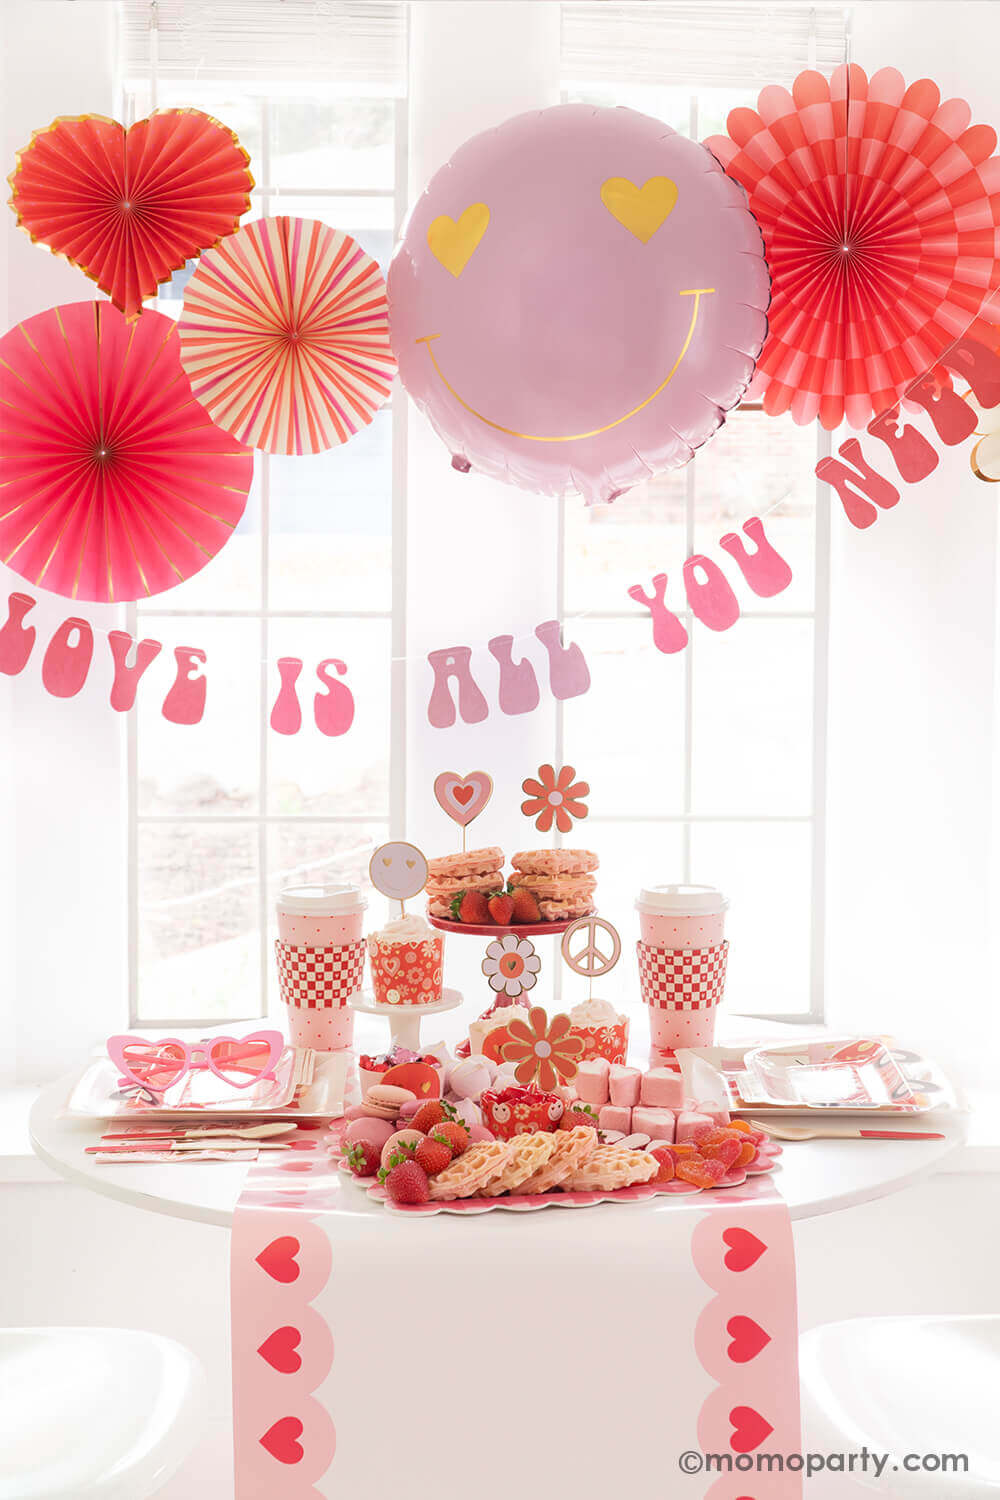 A Valentine's Day party featuring Momo Party's Groovy Valentine's Day Party box set up with pink and red paper fans in heart shape and a "love is all you need" banner in retro type hung below the paper fans. On the table you can see a sweet board featuring treats and snacks in red and pink colors including heart shaped waffles, strawberries, macarons, marshmallows etc. Next to the desert board featured retro inspired Valentine's plates, party cups and napkins, a perfect inspo for Vday celebration!